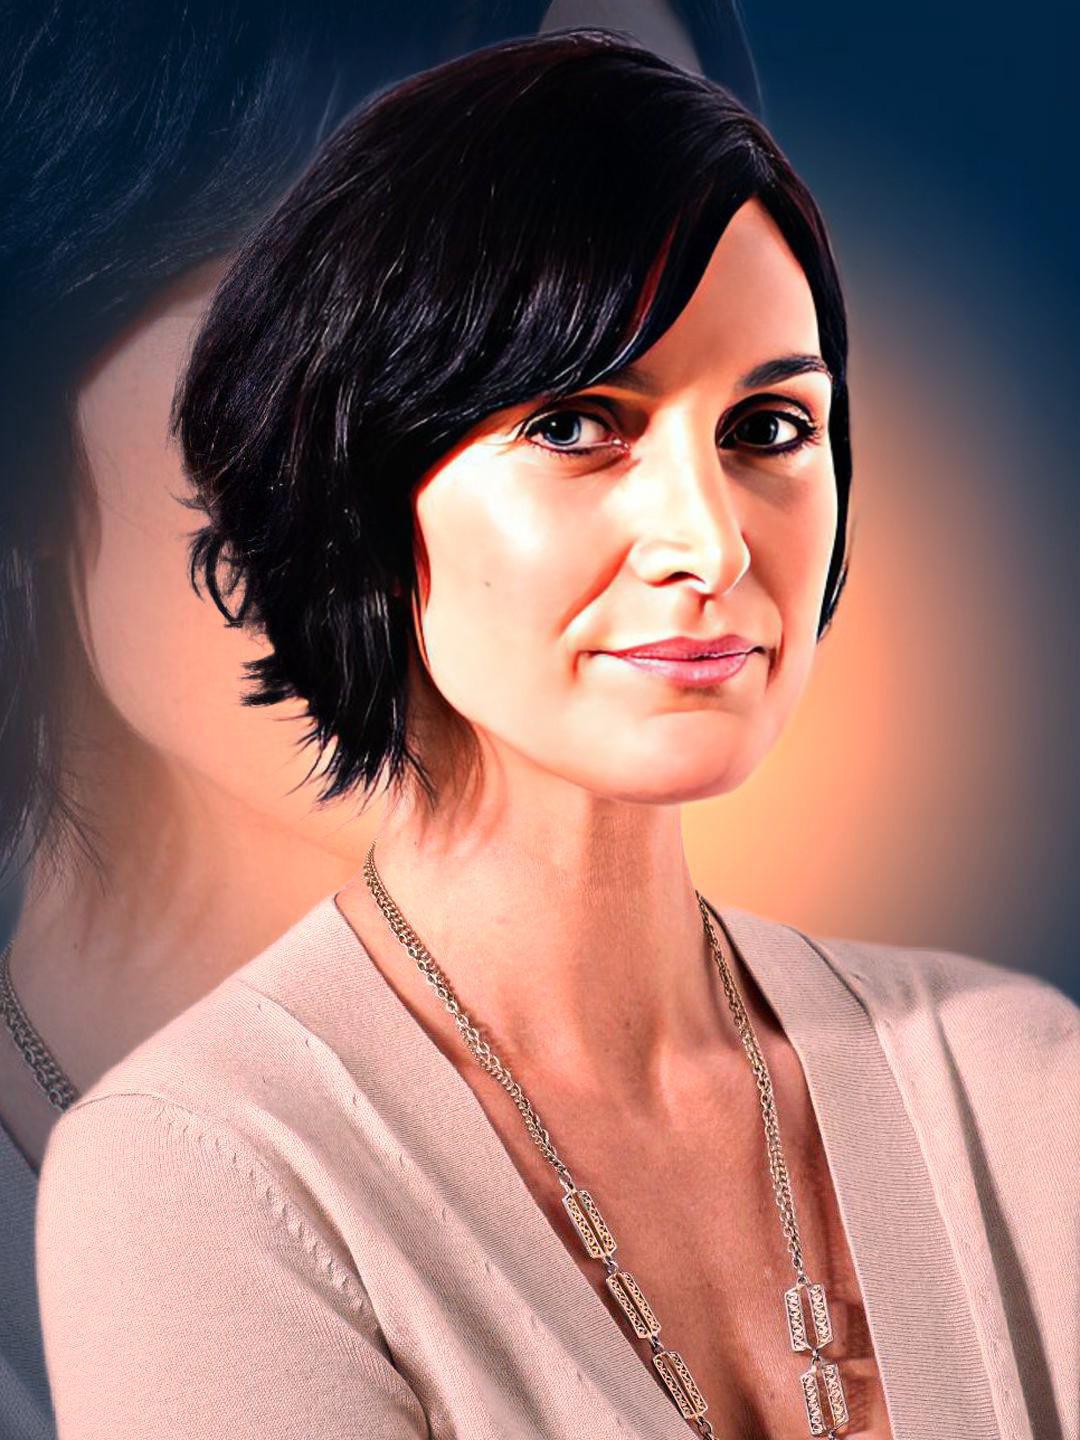 Beach Voyeur Mother In Law - Carrie-Anne Moss - Celeb ART - Beautiful Artworks of Celebrities,  Footballers, Politicians and Famous People in World | OpenSea